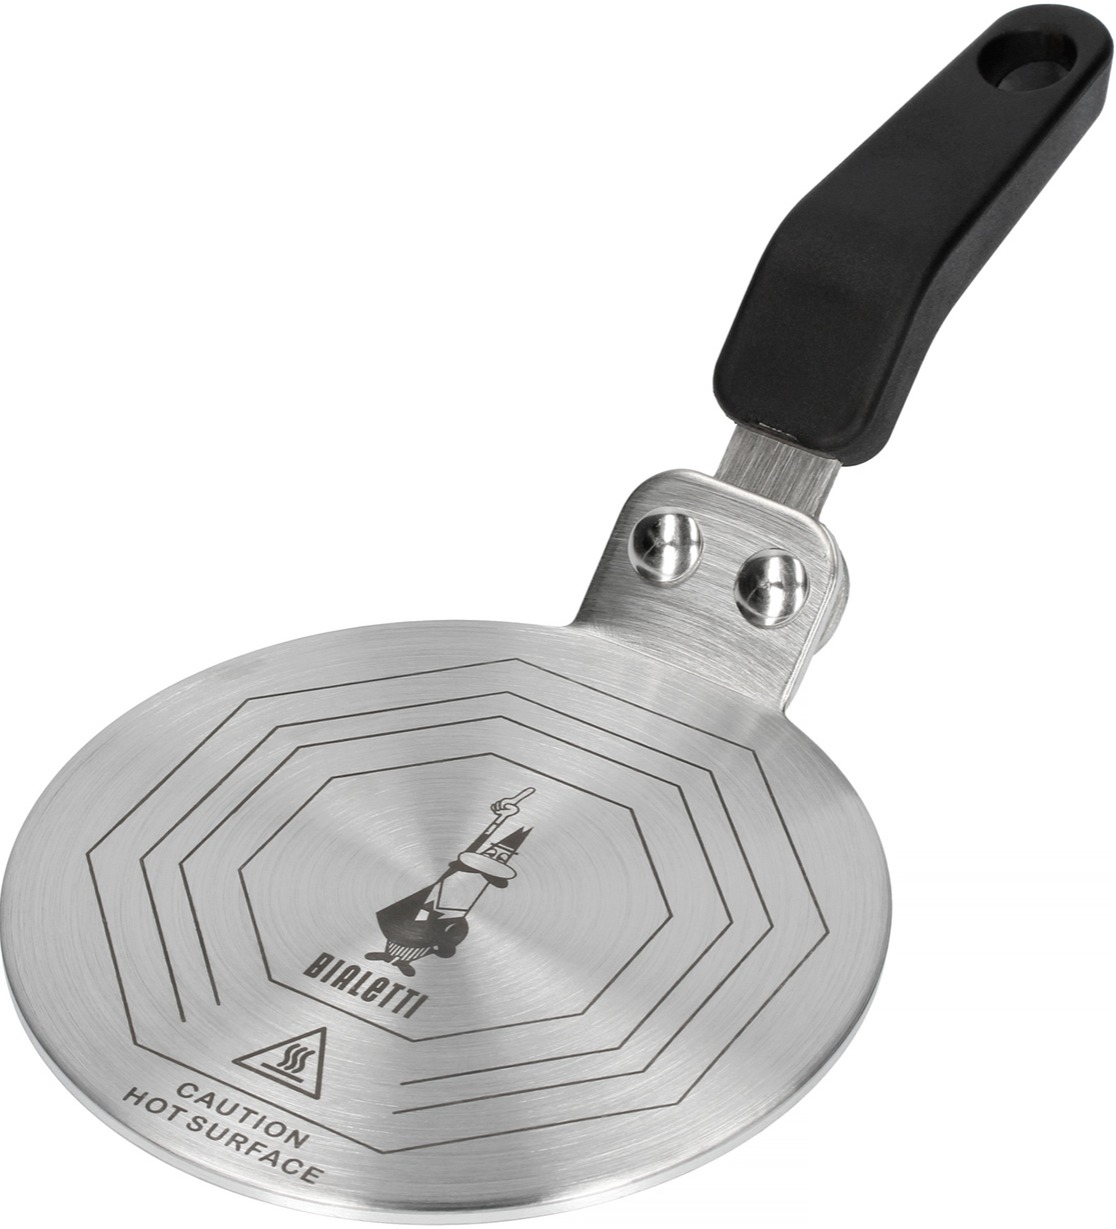 INDUCTION PLATE MOKA EXPRESS 13 cm - HEIROL Global - Kitchenware for life